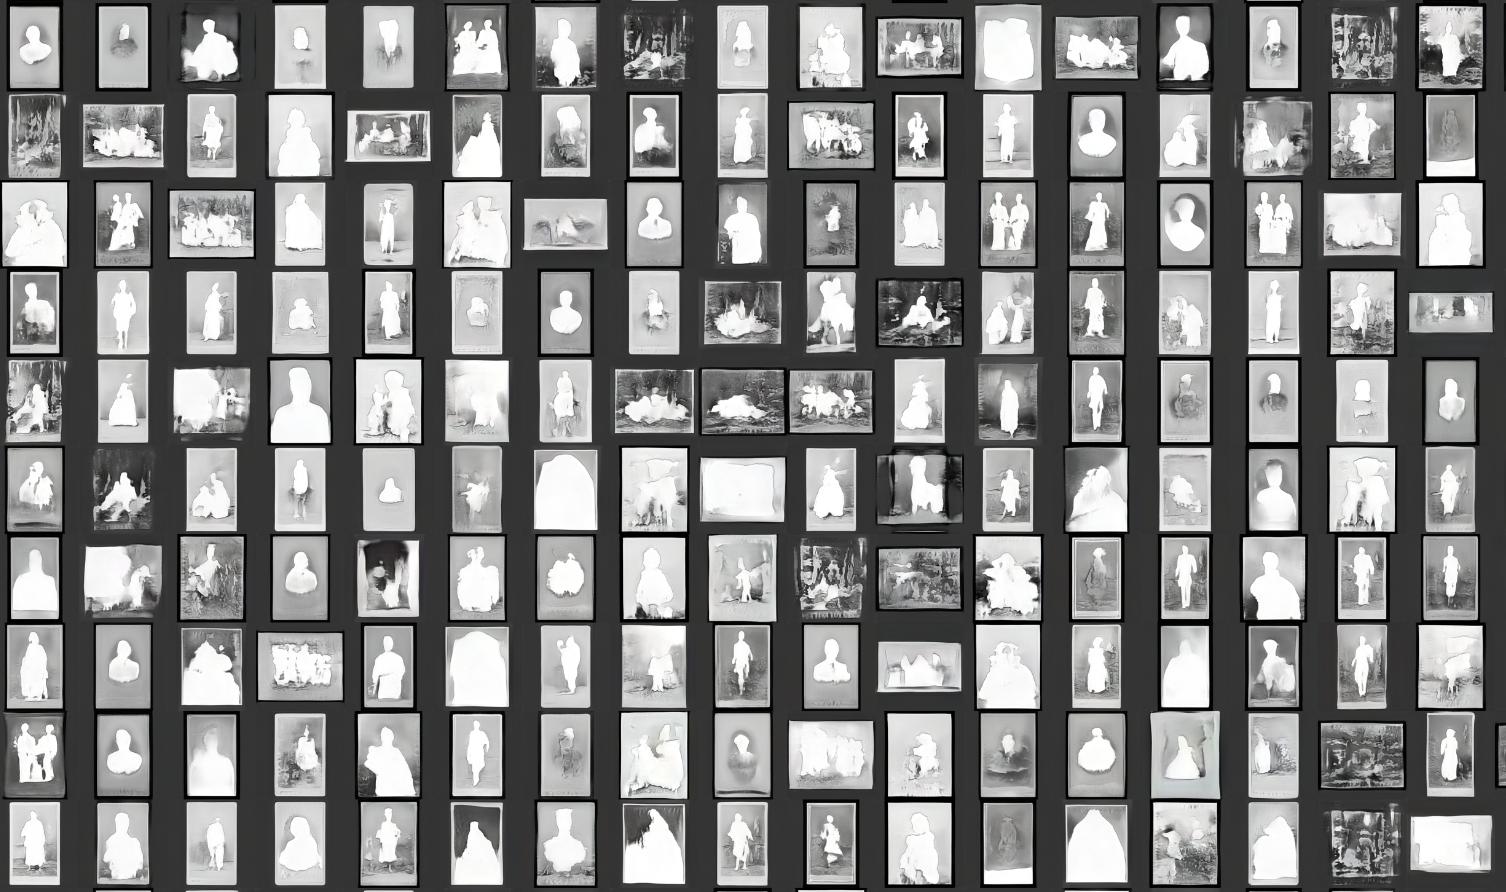 A grid of small grayscale portrait images, each with the central character whited out